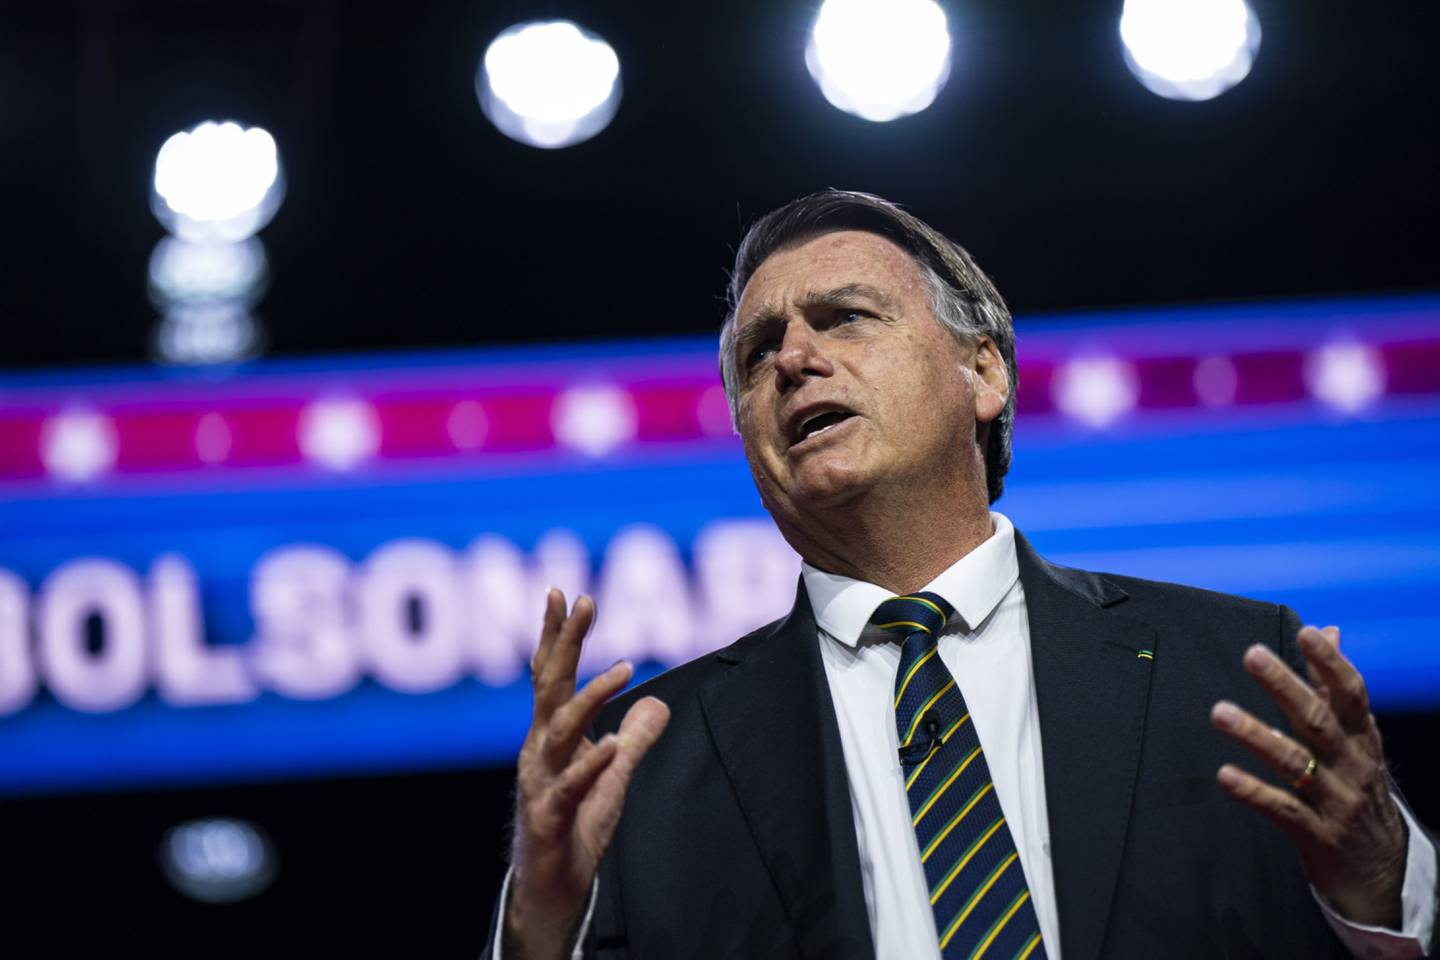 Jair Bolsonaro speaks during the CPAC 2023 in National Harbor, Maryland, on March 4.